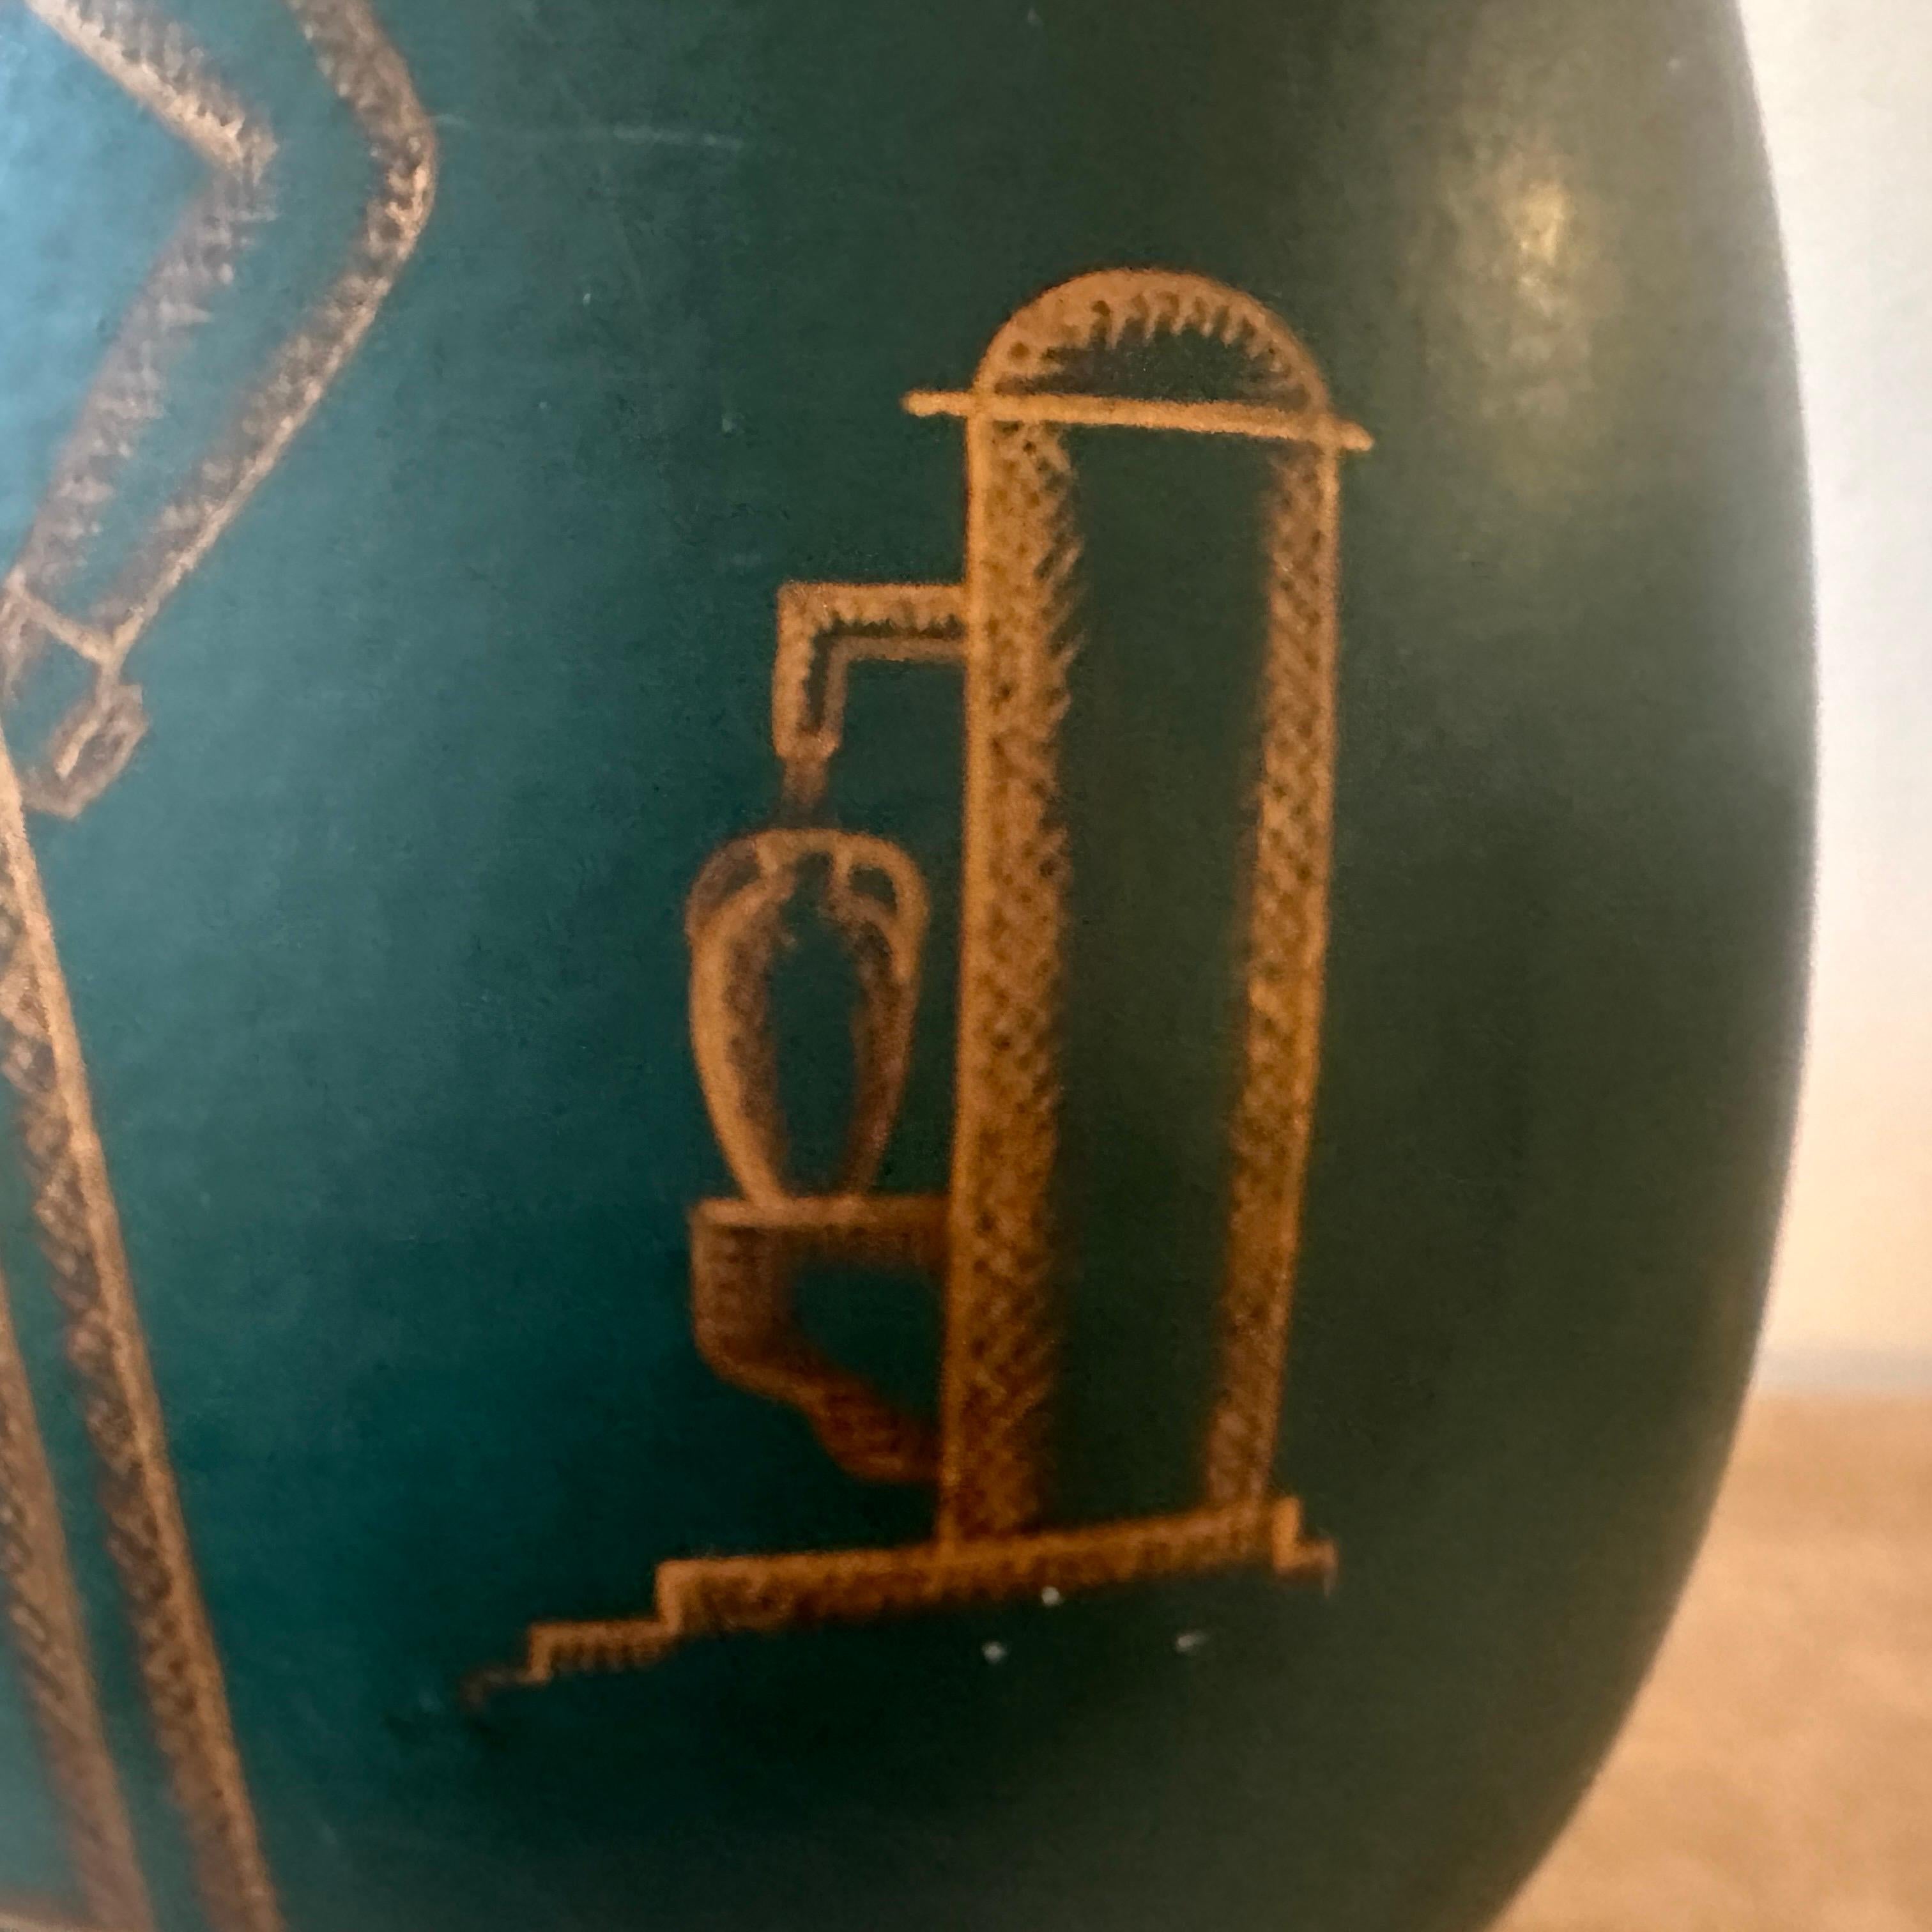 A 1939 Dated Art Deco Gio Ponti Inspired Green and Gold Ceramic Sicilian Vase For Sale 1